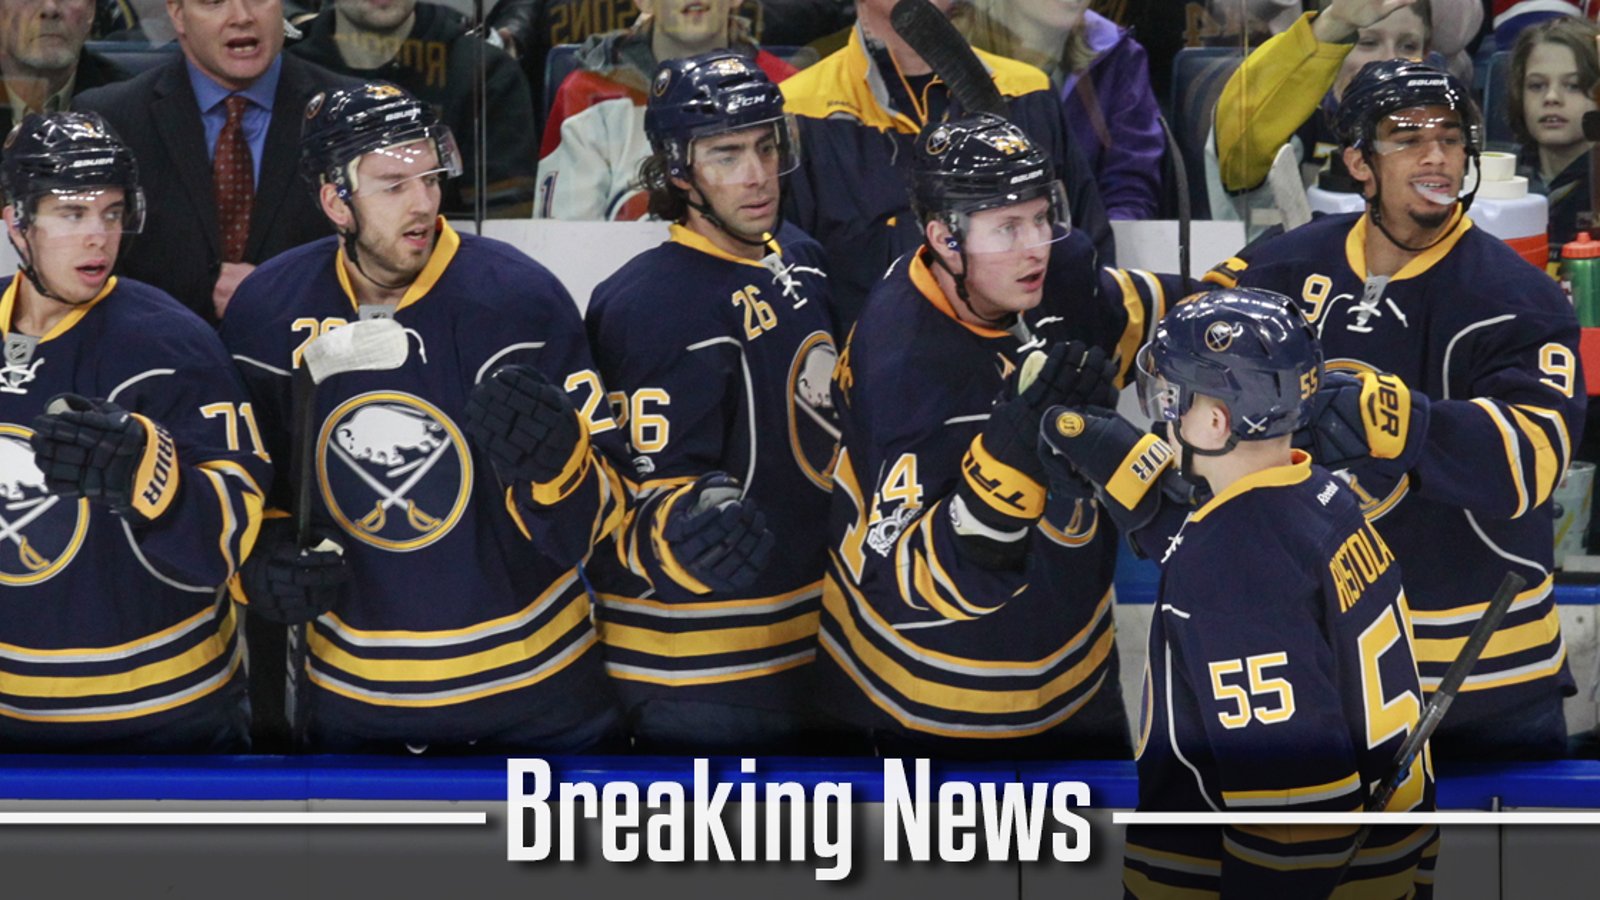 BREAKING: Buffalo Sabres have signed forward to a two-year contract.